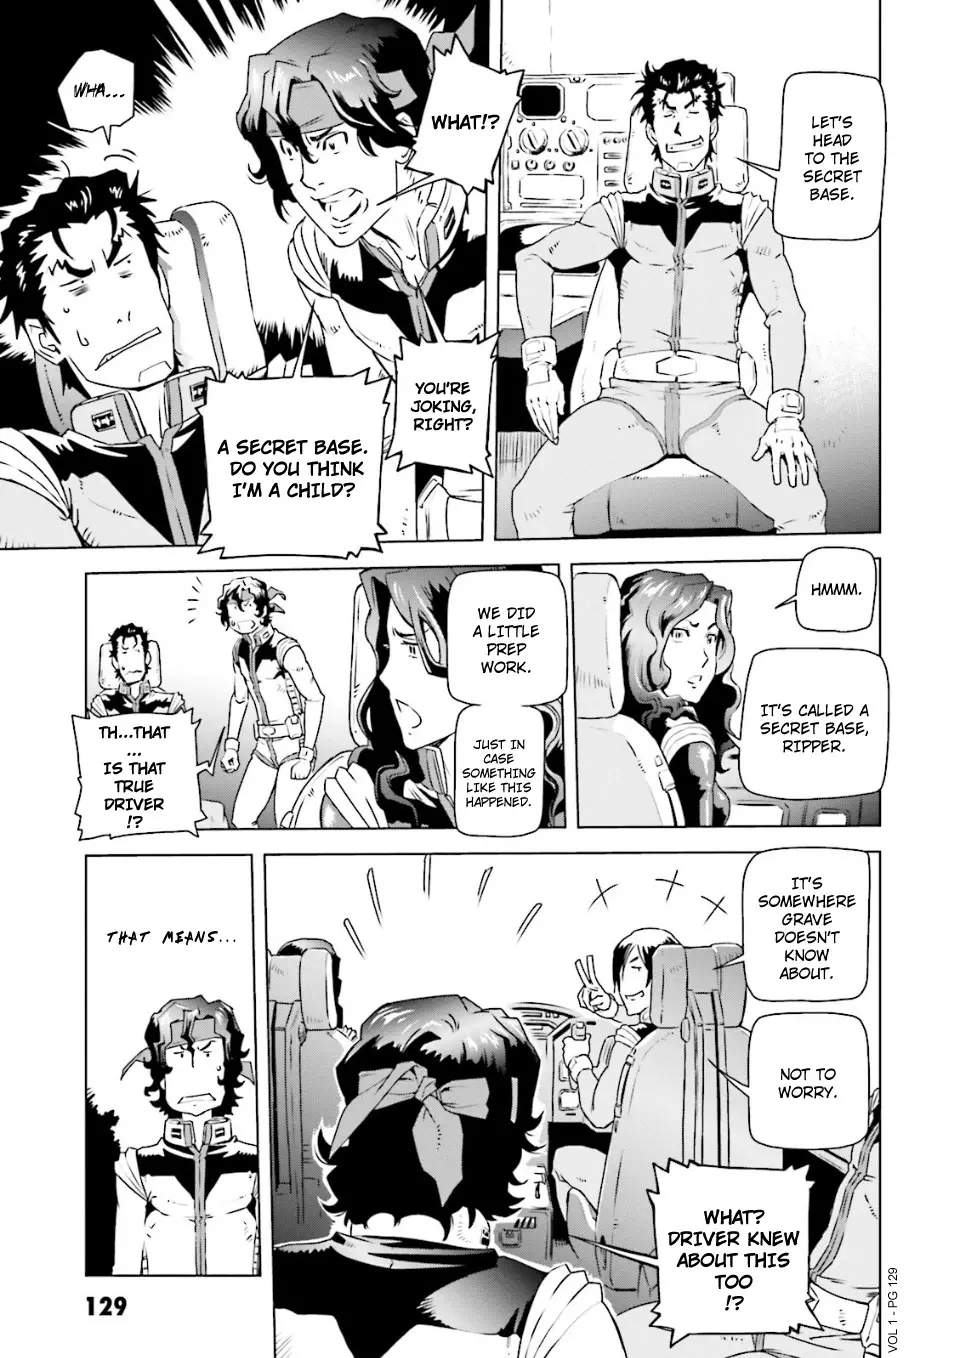 Mobile Suit Gundam Side Story - Missing Link - 5 page 9-47e8c682